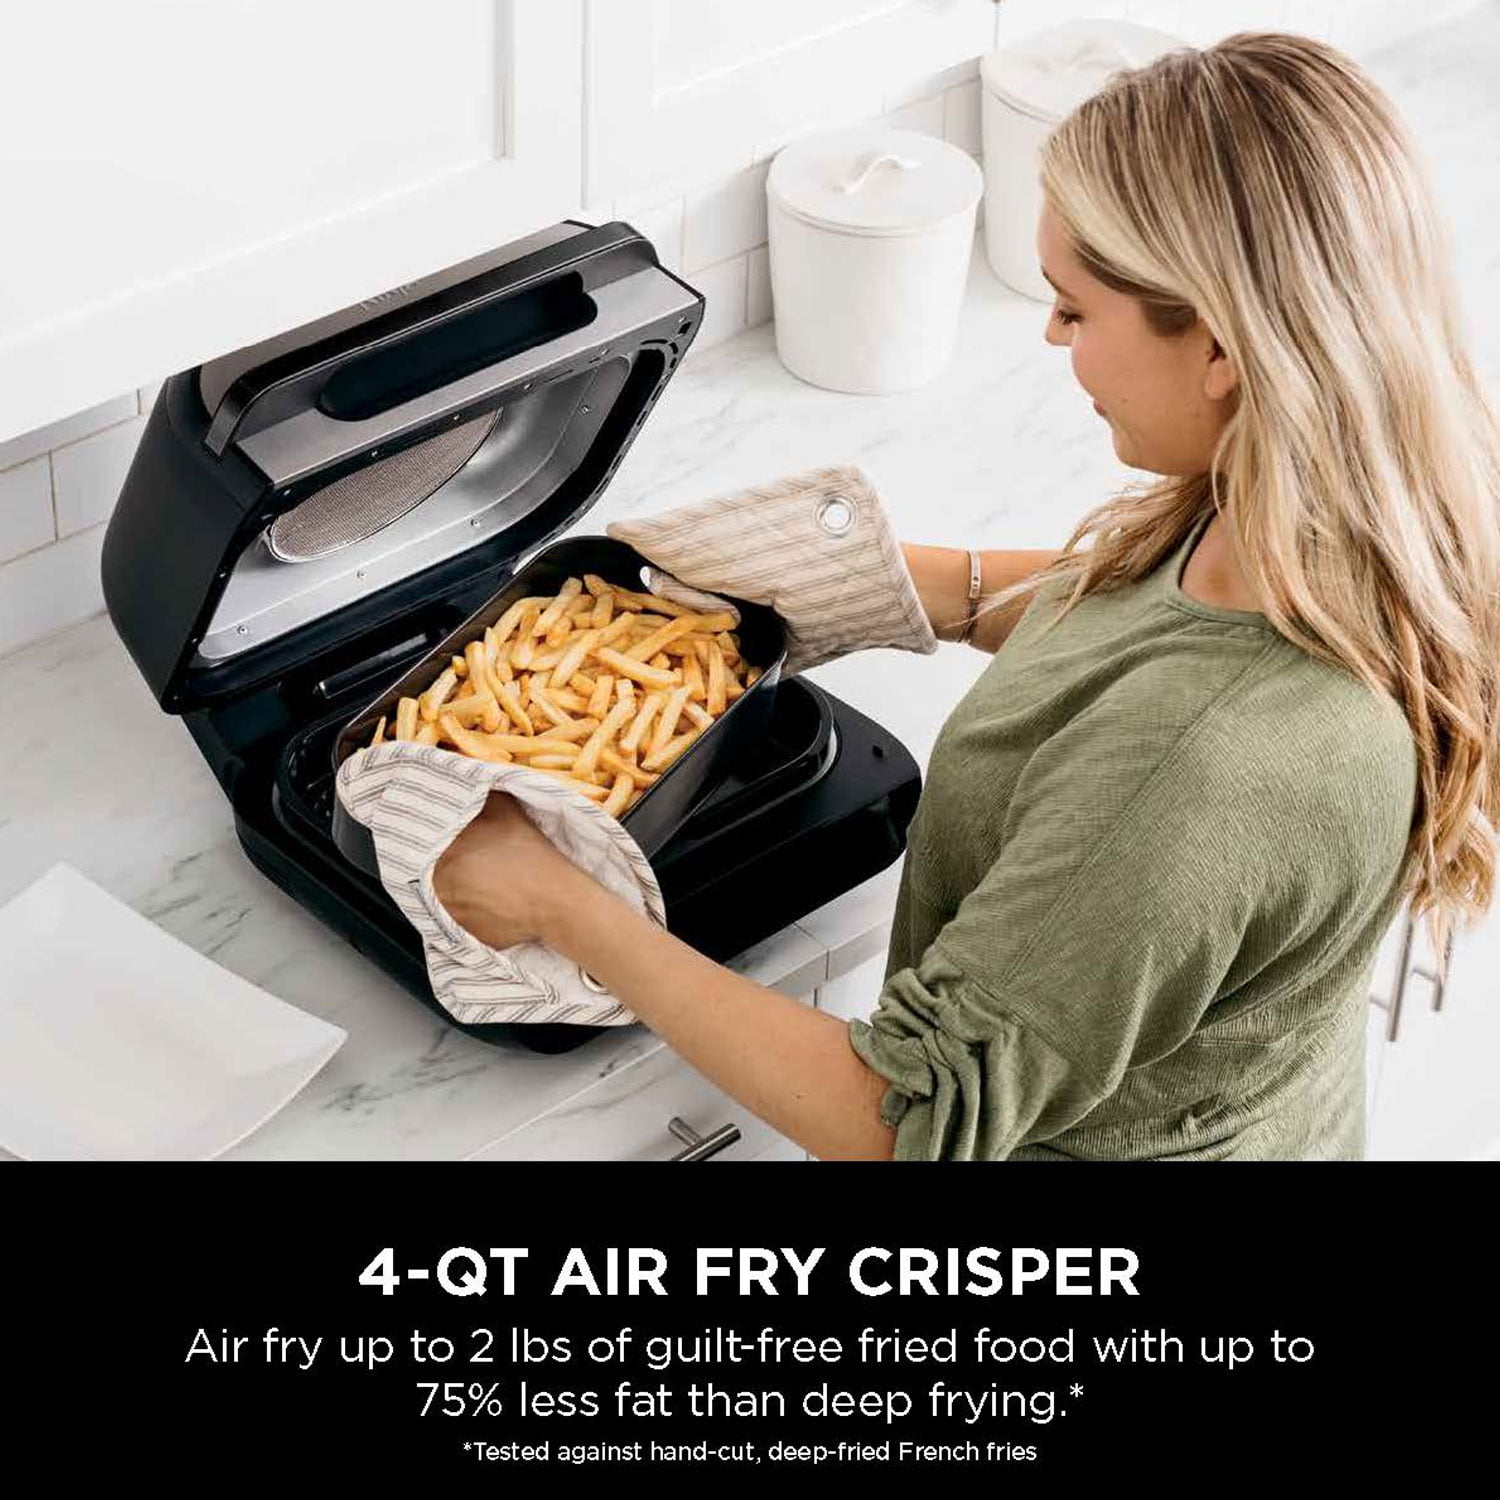 Regularly up to $190 Ninja Foodi Smart Grill Air Fryer for $99